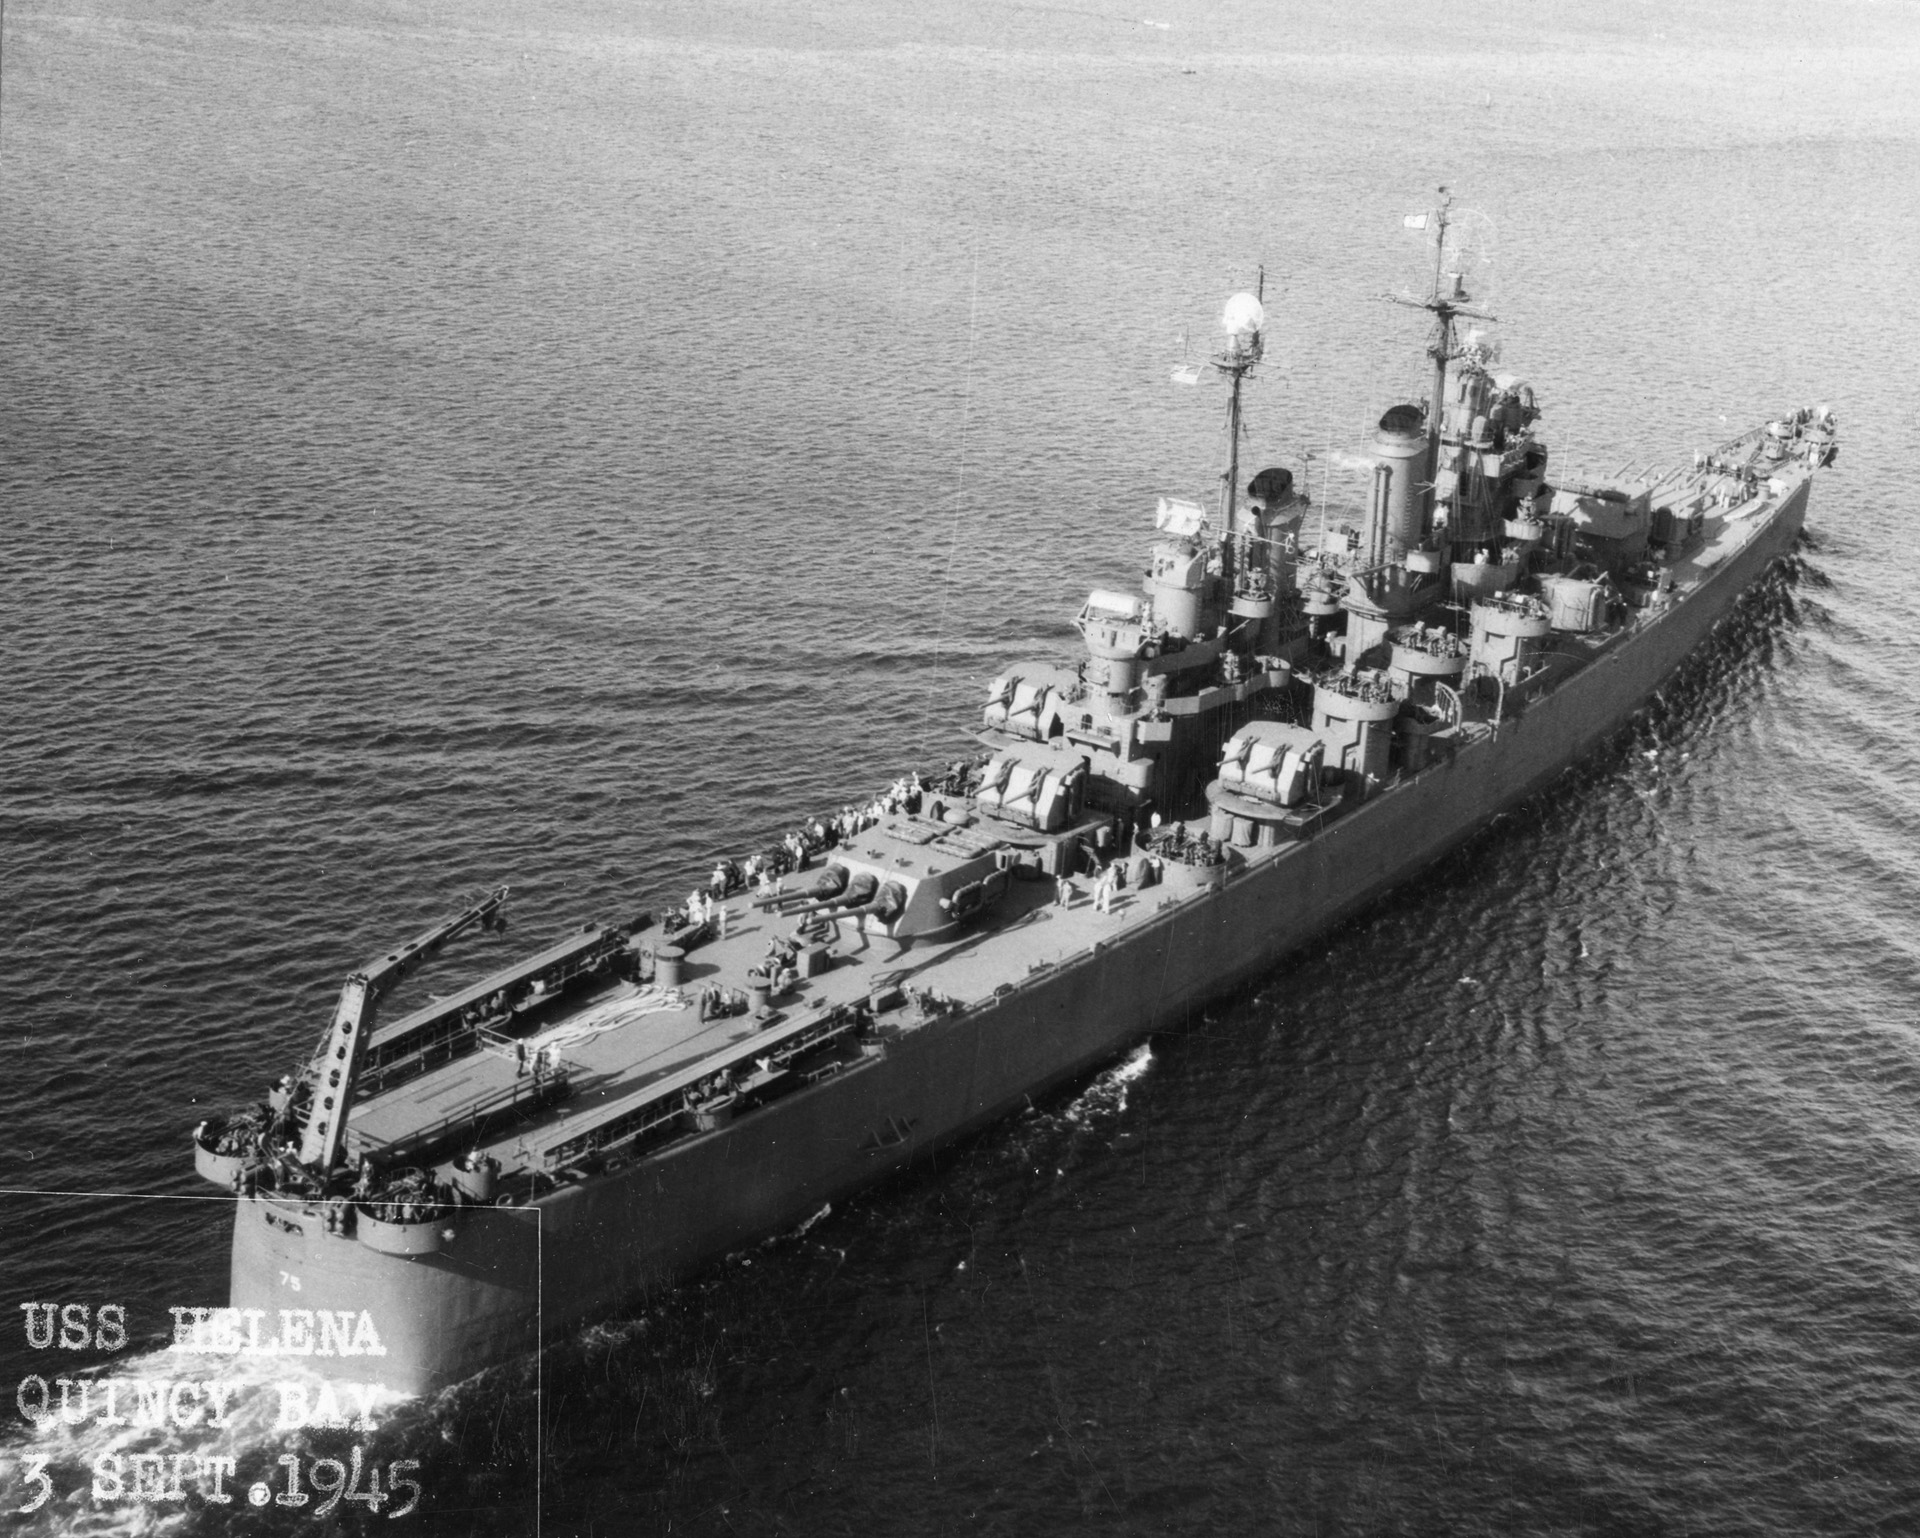 The St. Louis-class light cruiser USS Helena (CL-50), one of four cruisers taking part in the Munda operation, displays her impressive armament. Her AA guns may have brought down a Japanese plane during the Munda assault.